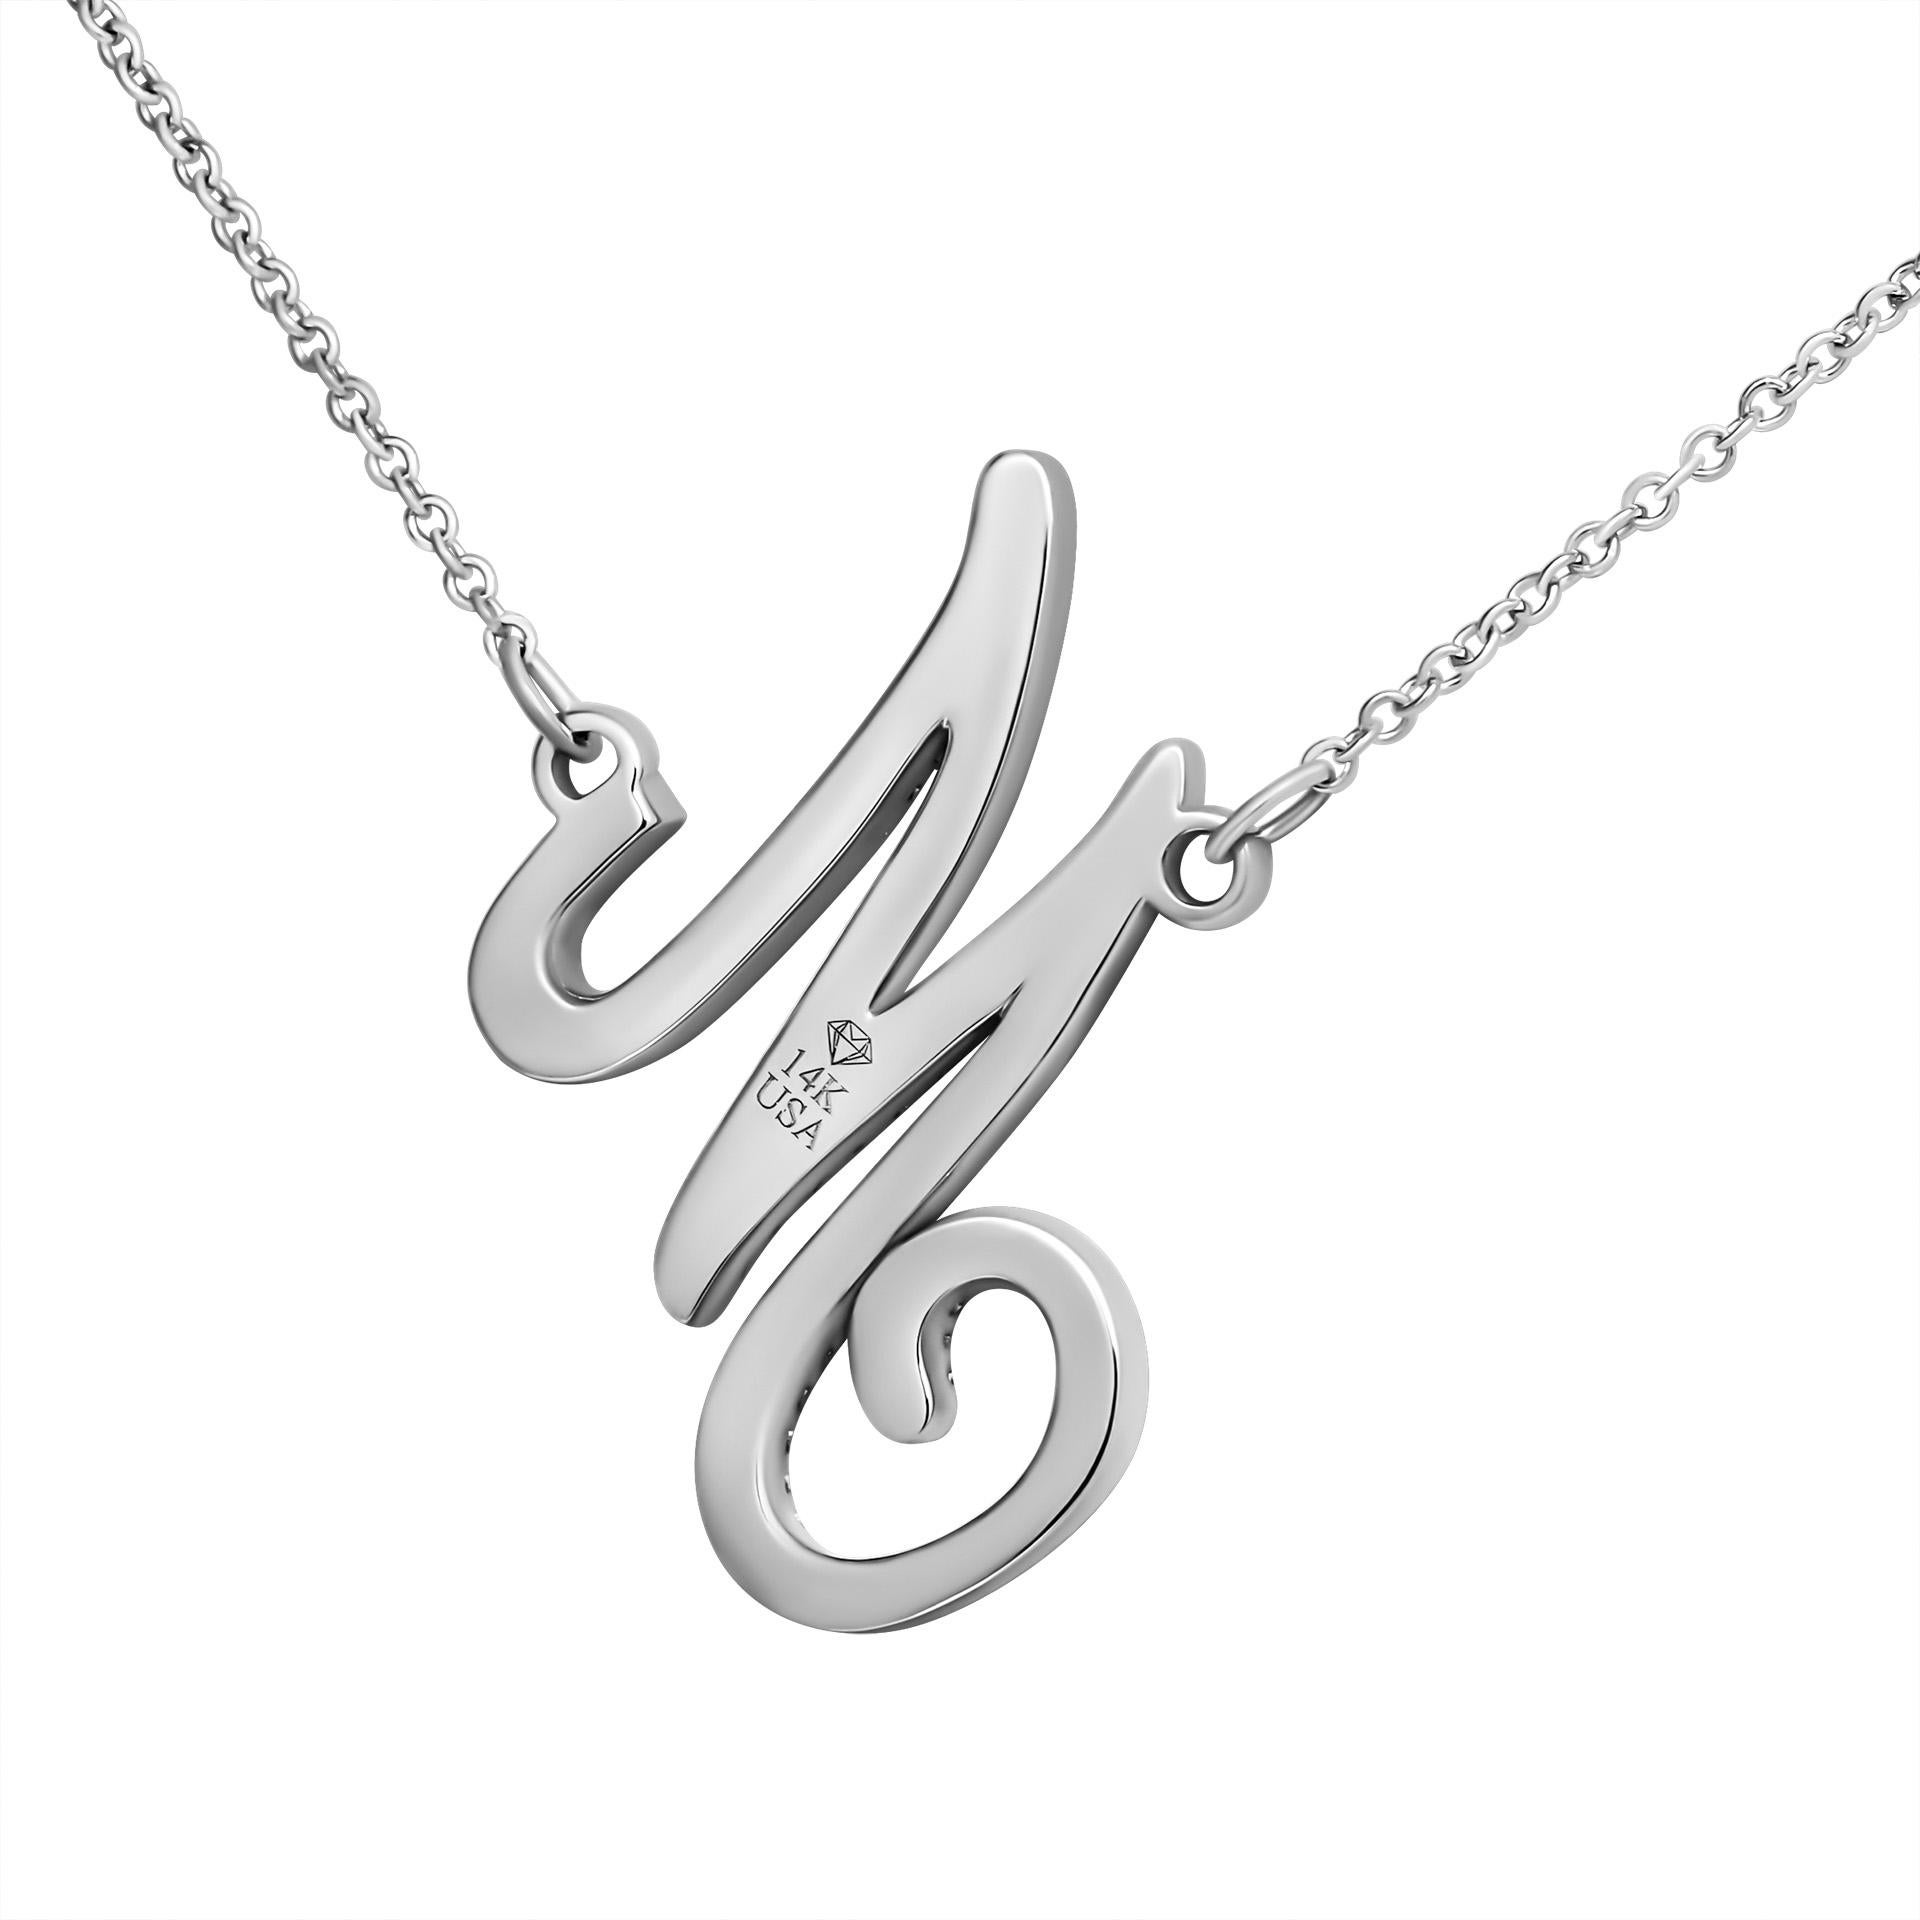 Diamond Initial Necklace
Letter 